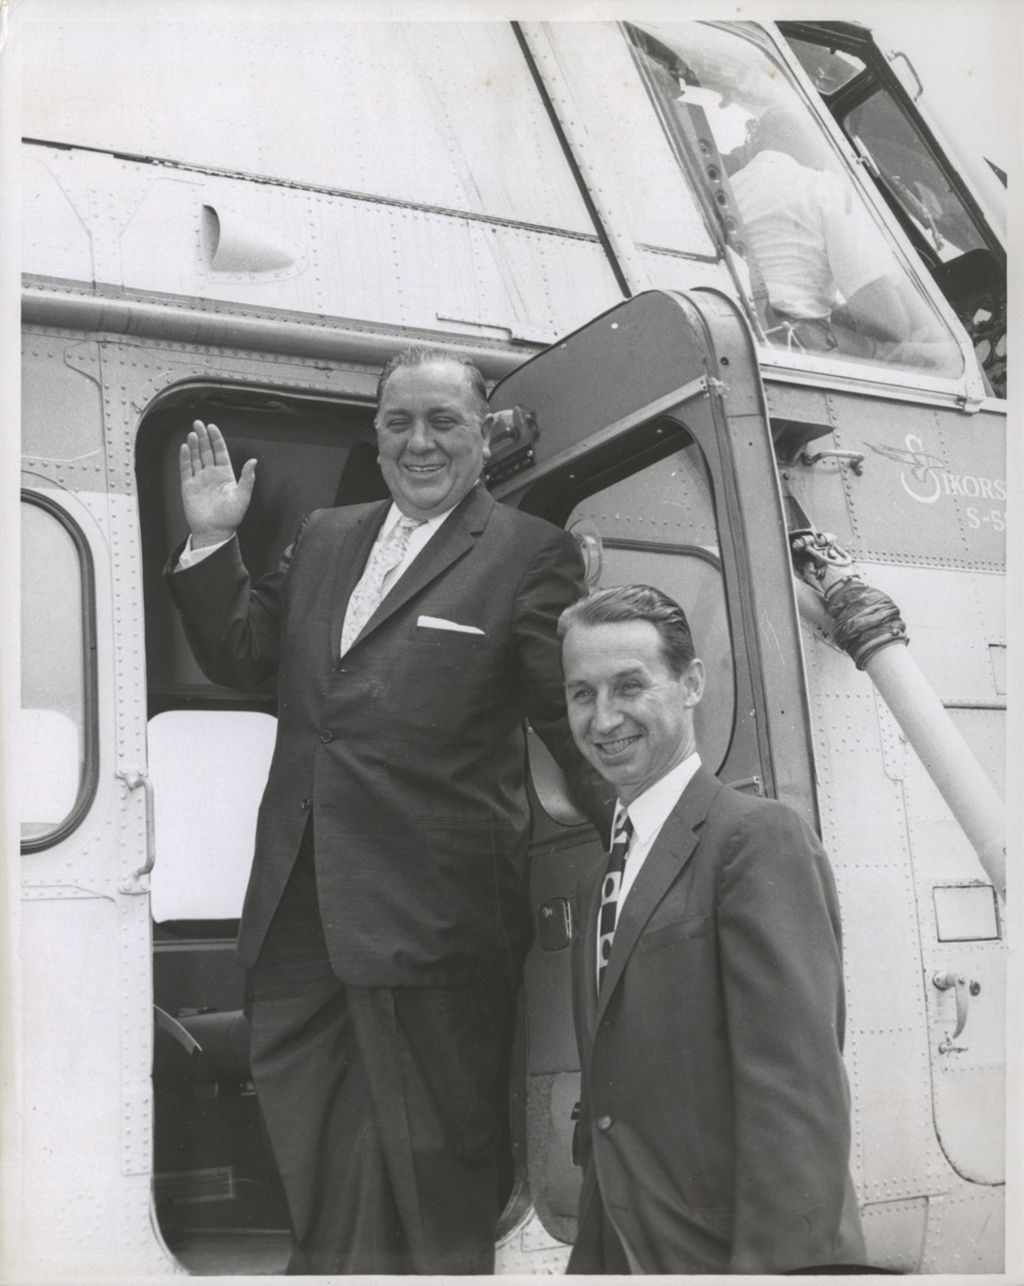 Miniature of Richard J. Daley and man entering a helicopter